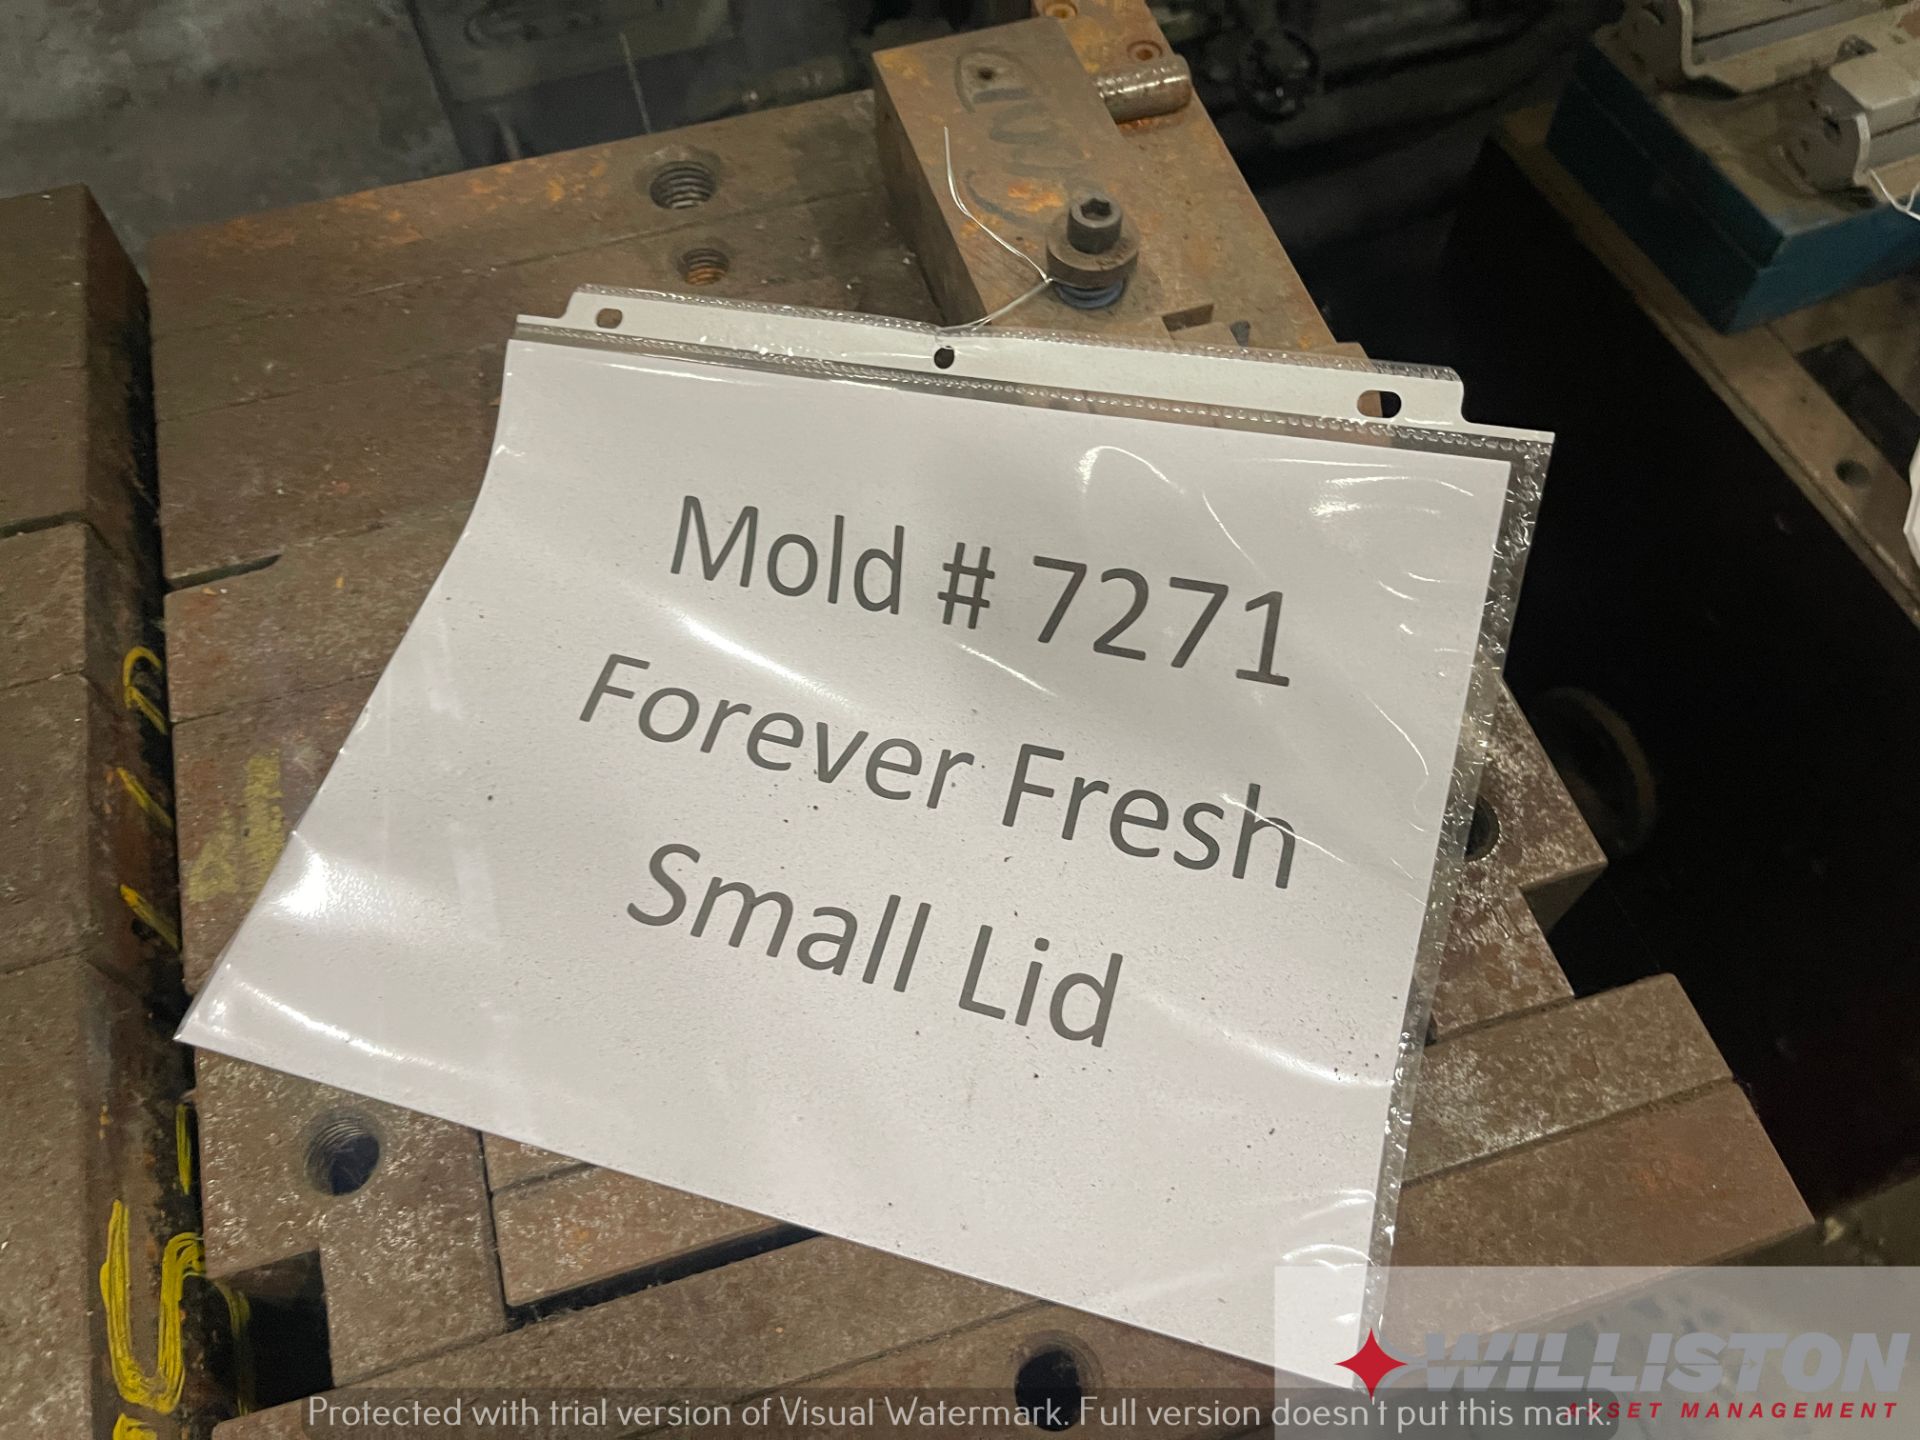 PLASTIC INJECTION MOLD - Forever Fresh Small Lid - Image 2 of 7